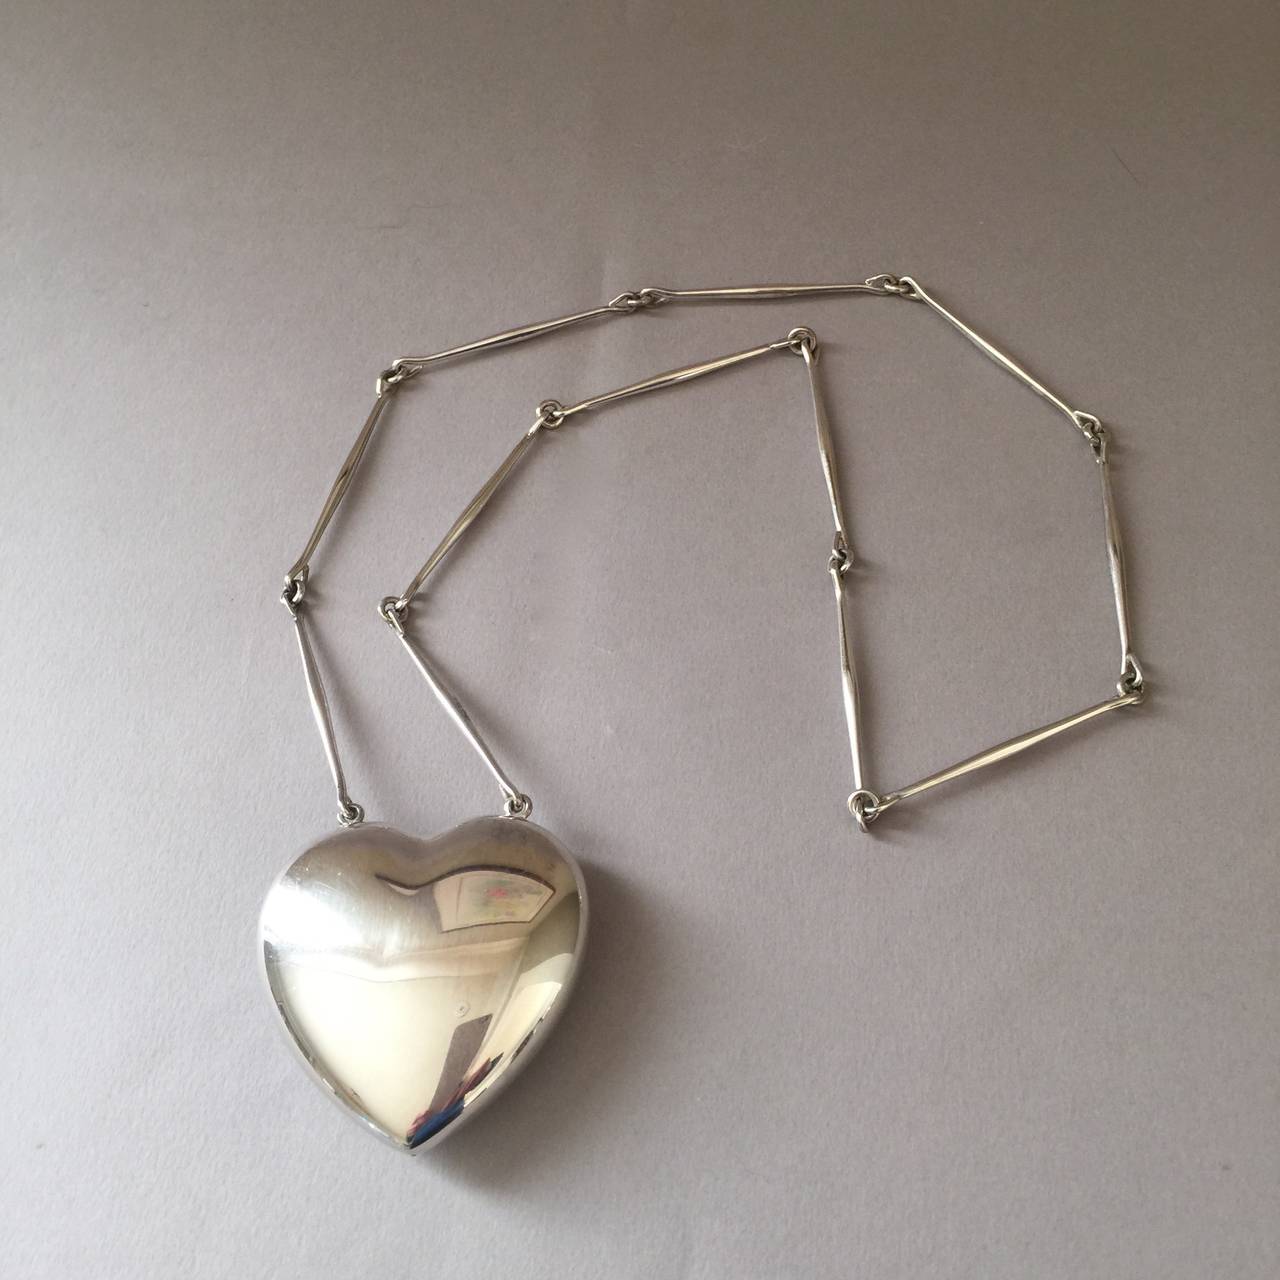 Georg Jensen Heart Necklace by Astrid Fog, no. 126

Designed by Astrid Fog. Bold statement piece. Heavy-gauge sterling silver with hand-made links. 

28